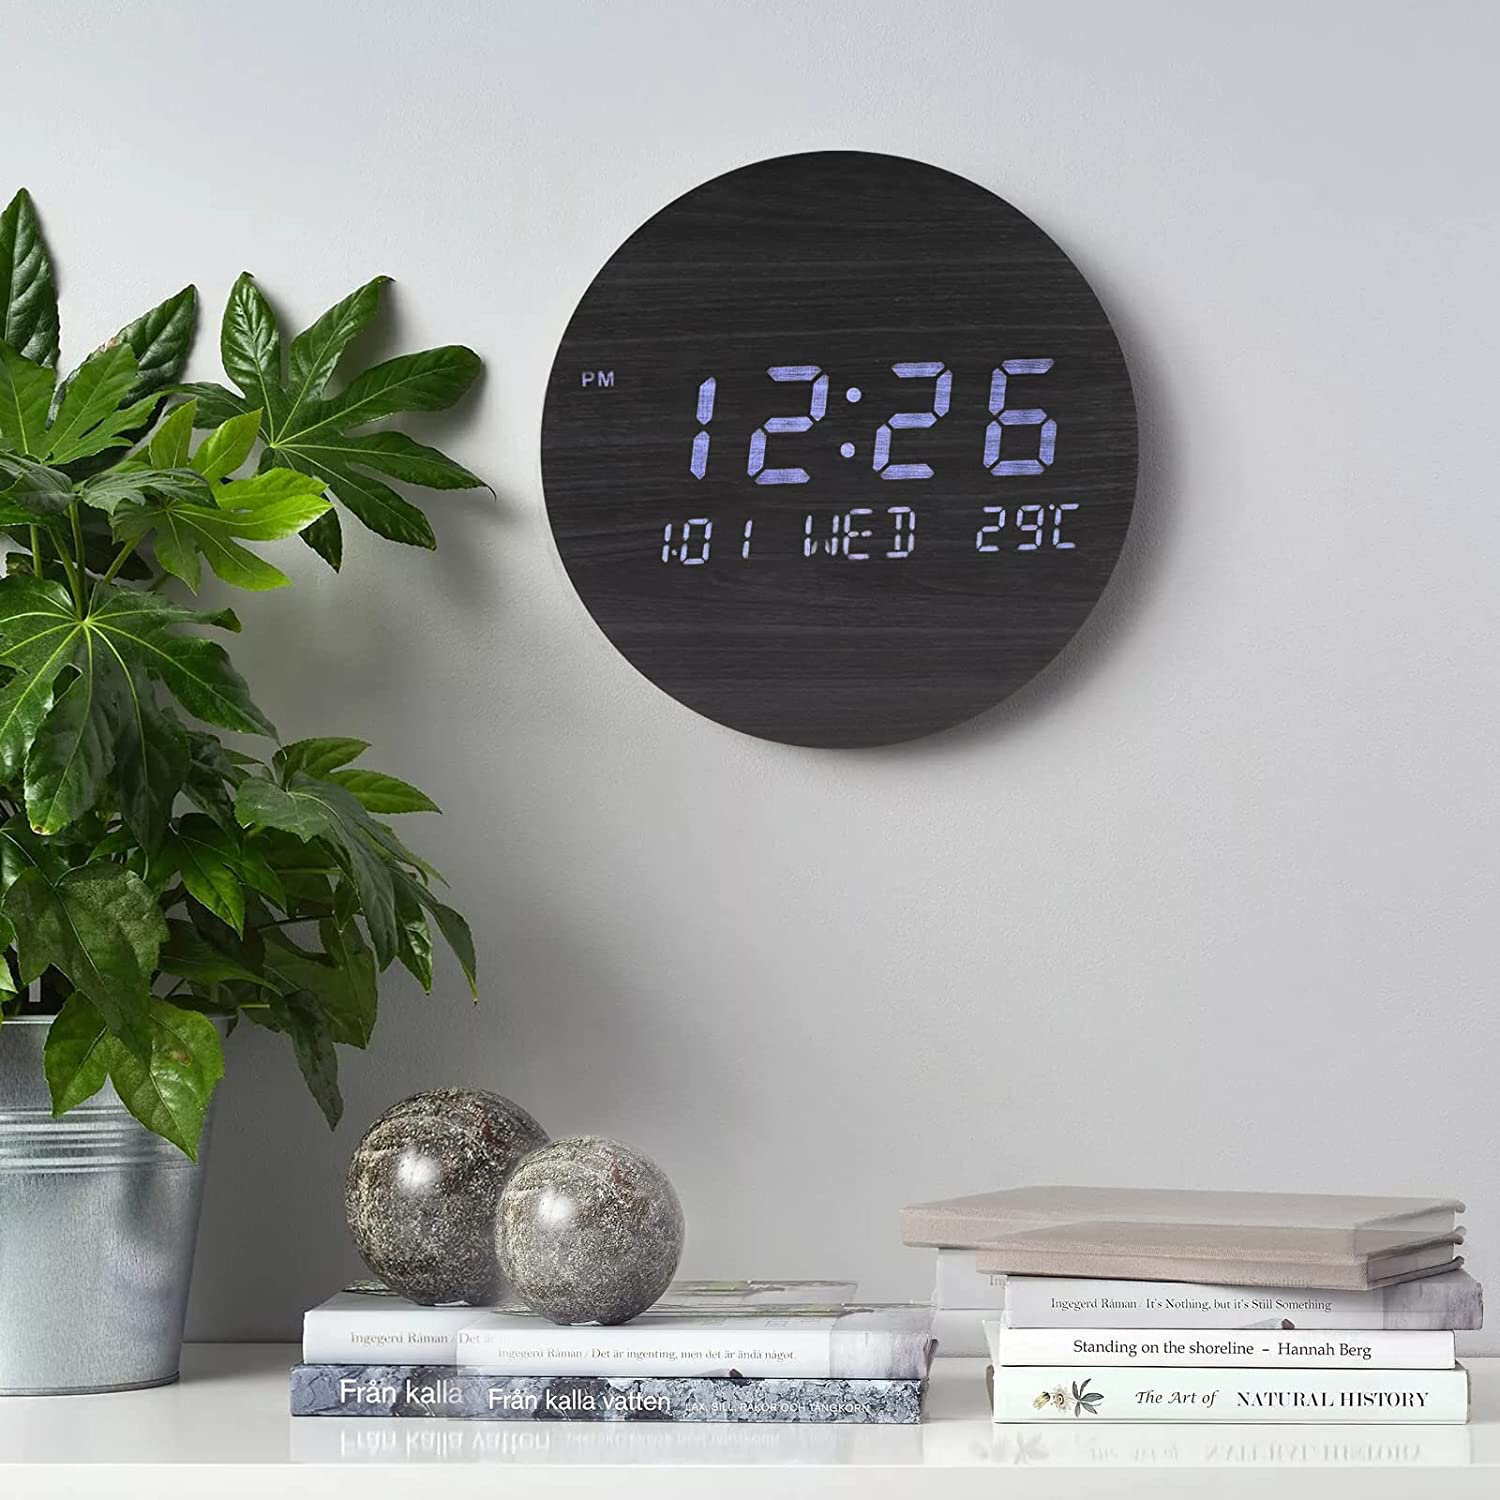 Dark Round Clock with Date and Time Display